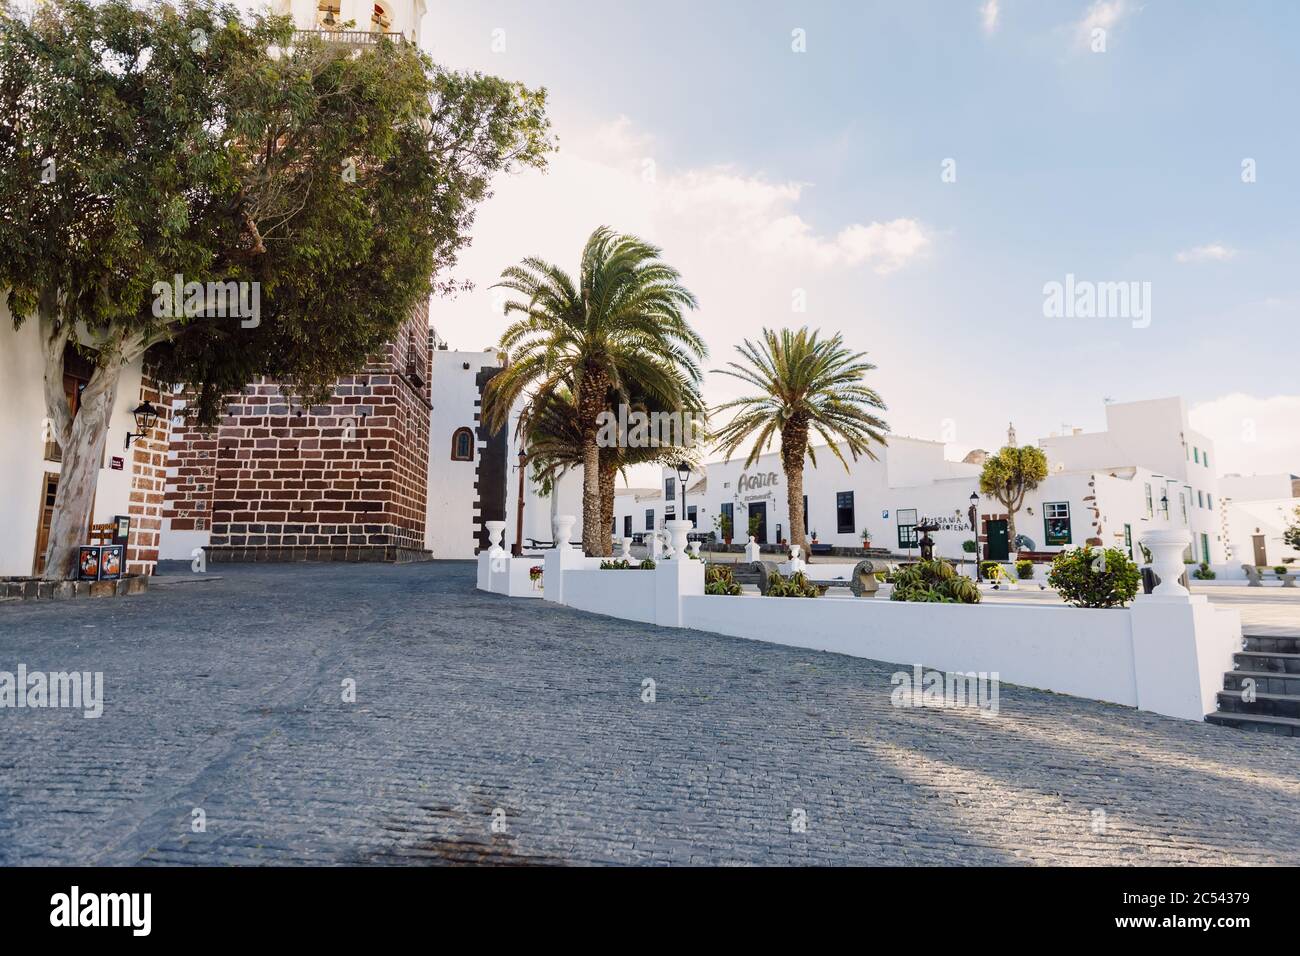 Lanzarote, Spain - April 04, 2020. The old architecture of city of Teguise. Church Iglesia de Nuestra Senora de Guadalupe and palms Stock Photo